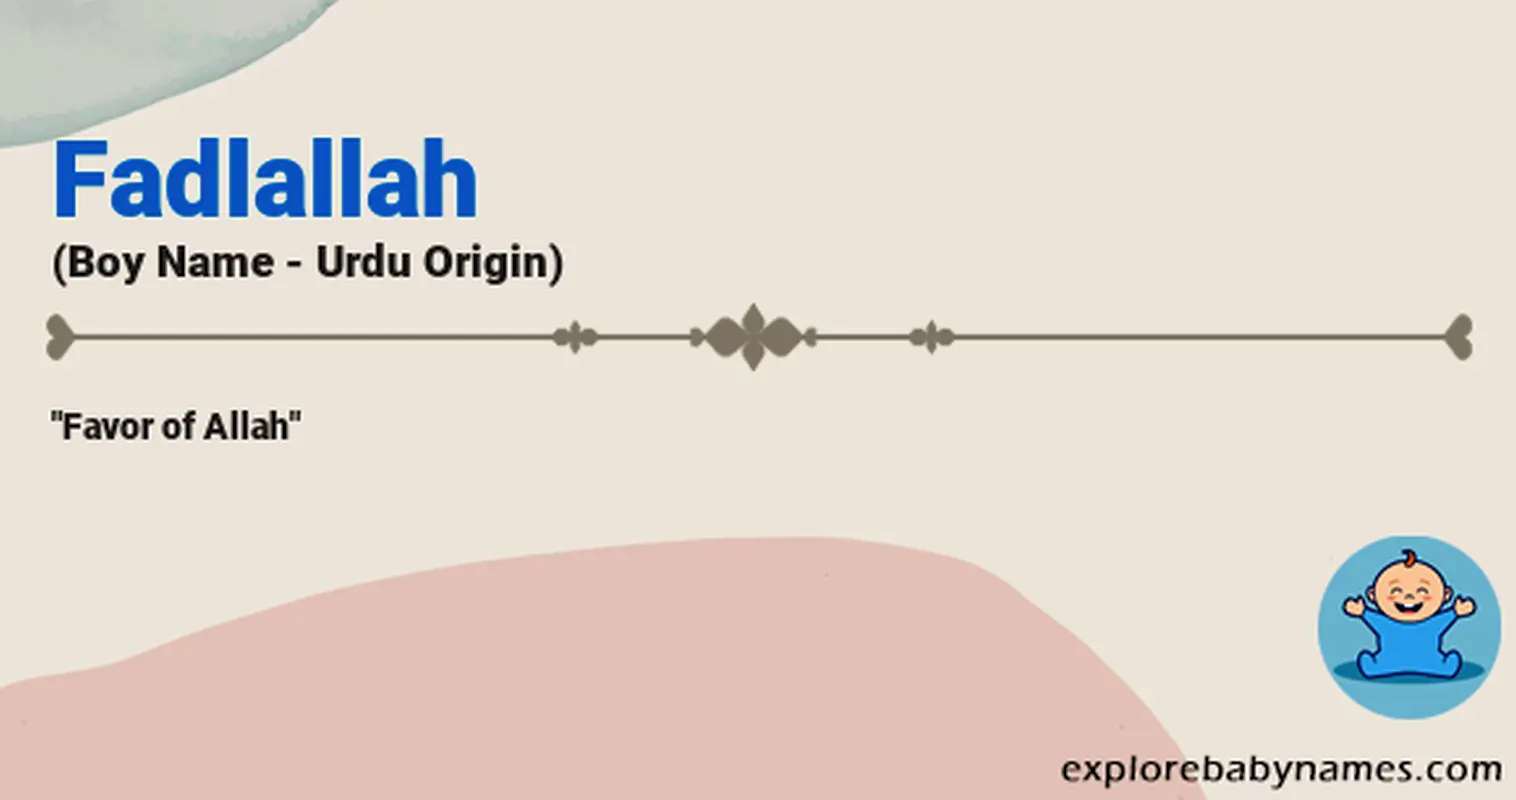 Meaning of Fadlallah